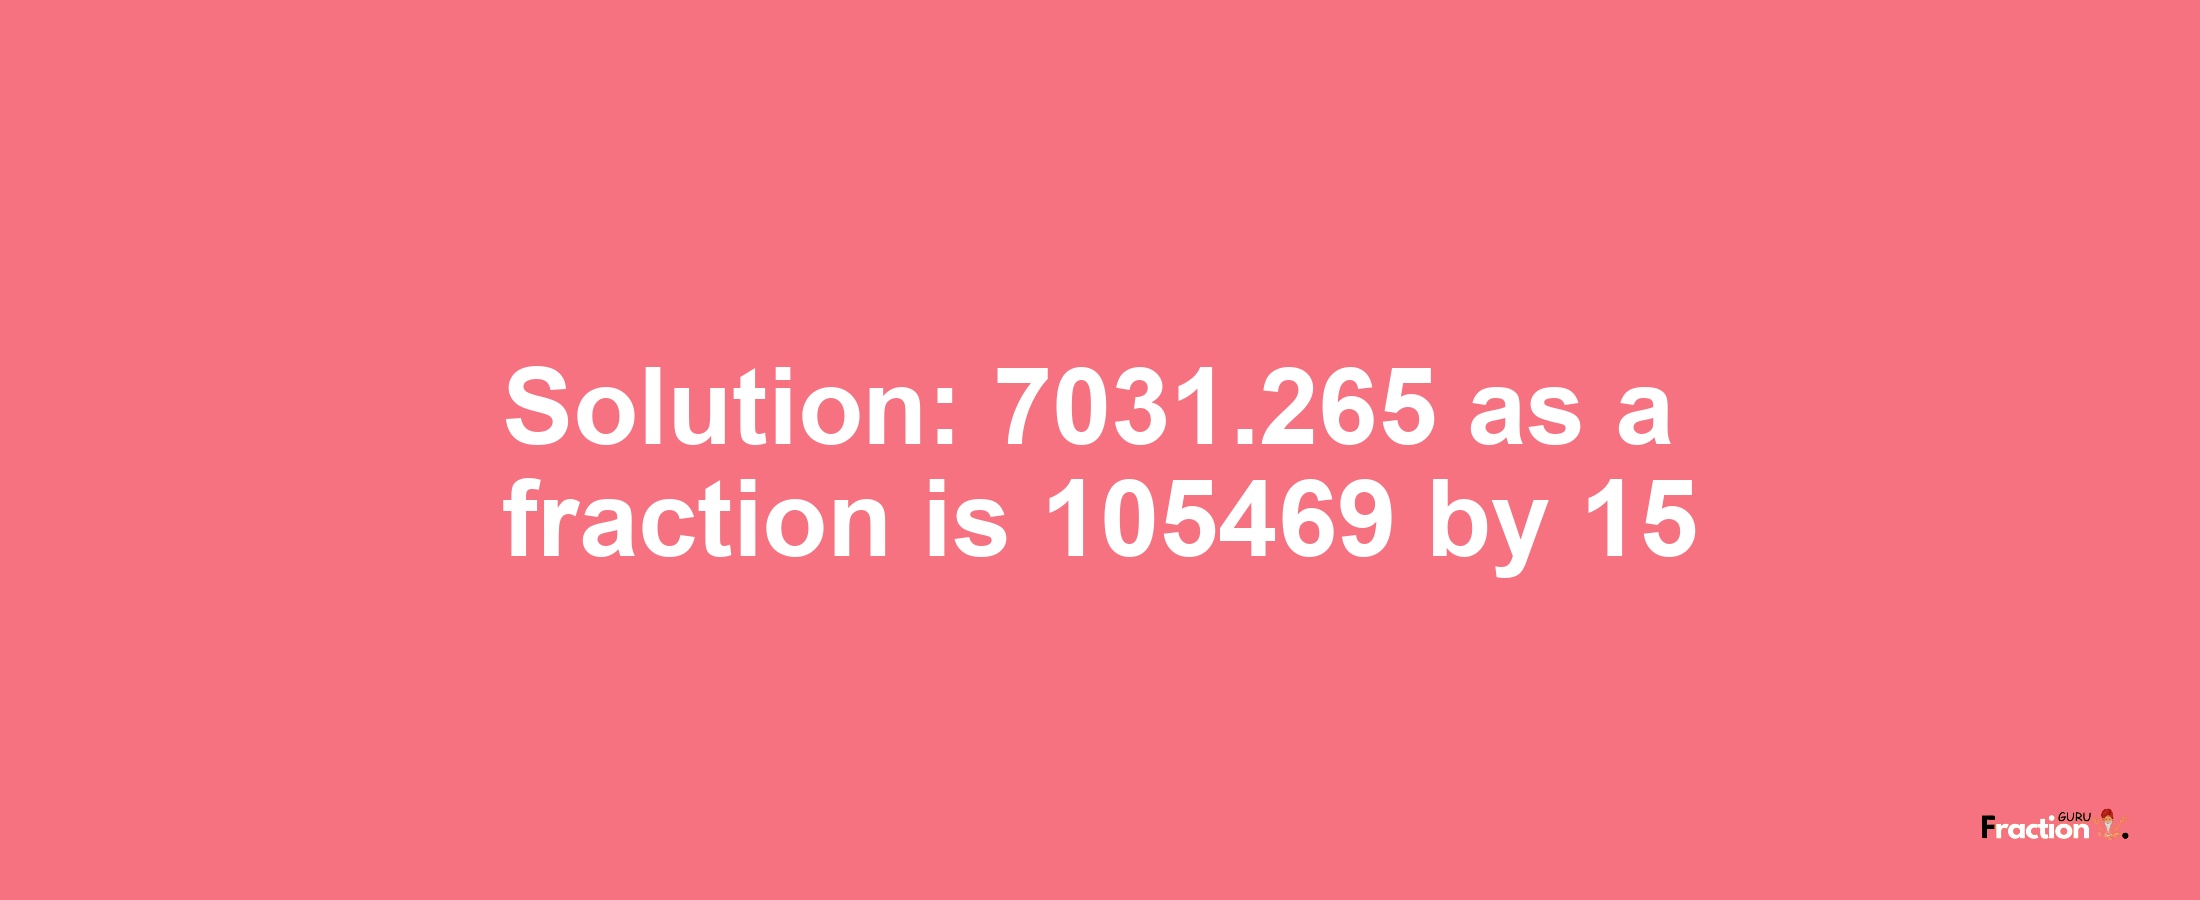 Solution:7031.265 as a fraction is 105469/15